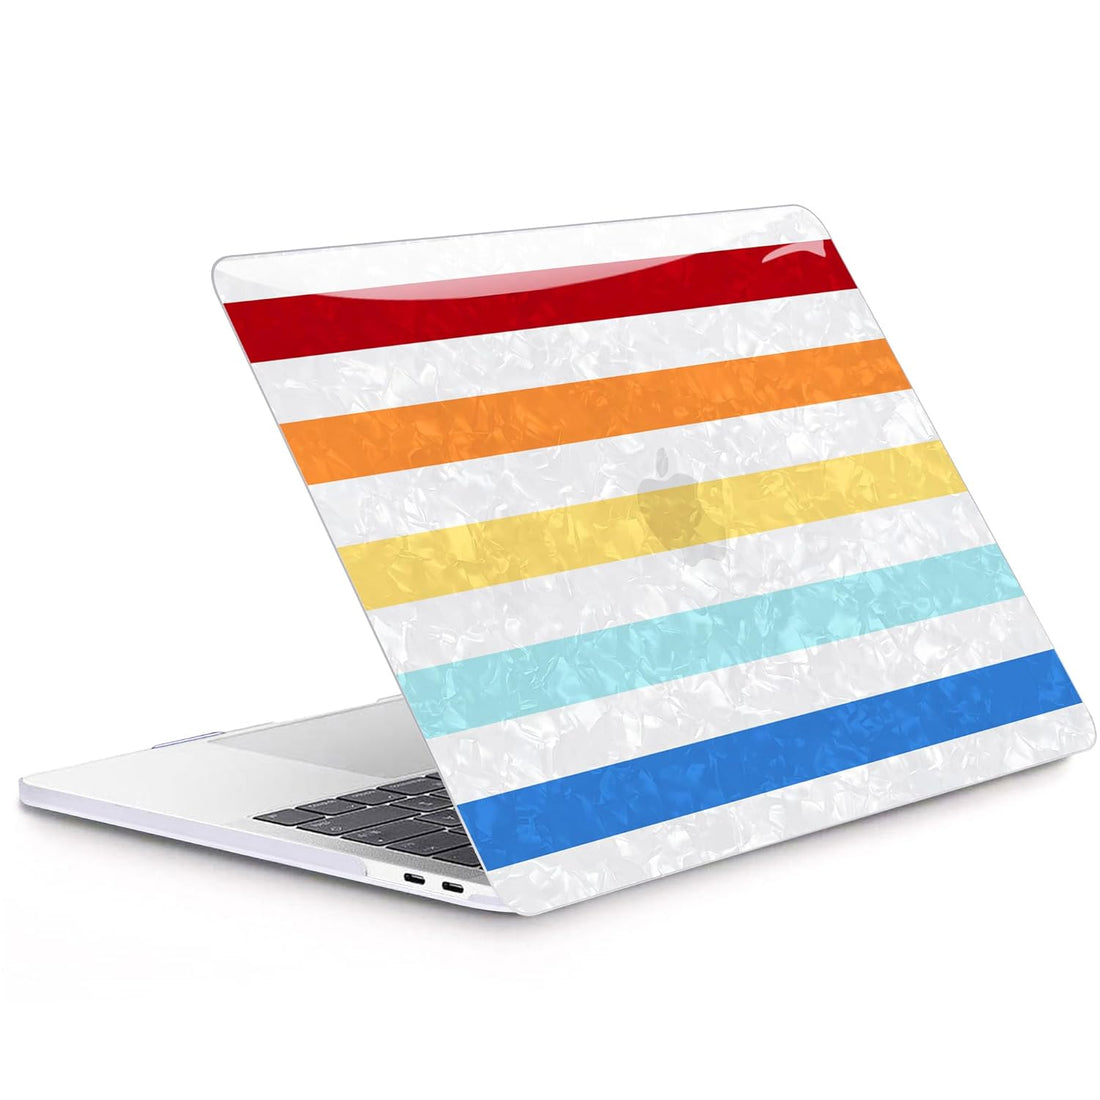 G JGOO Compatible with MacBook Air 13 inch Case 2022 2021 2020 2019 2018 Release M1 A2337 A2179 A1932 Touch ID, Glitter Pearl Hard Shell Case + 2 Keyboard Covers + Screen Protector, Colorful Stripe